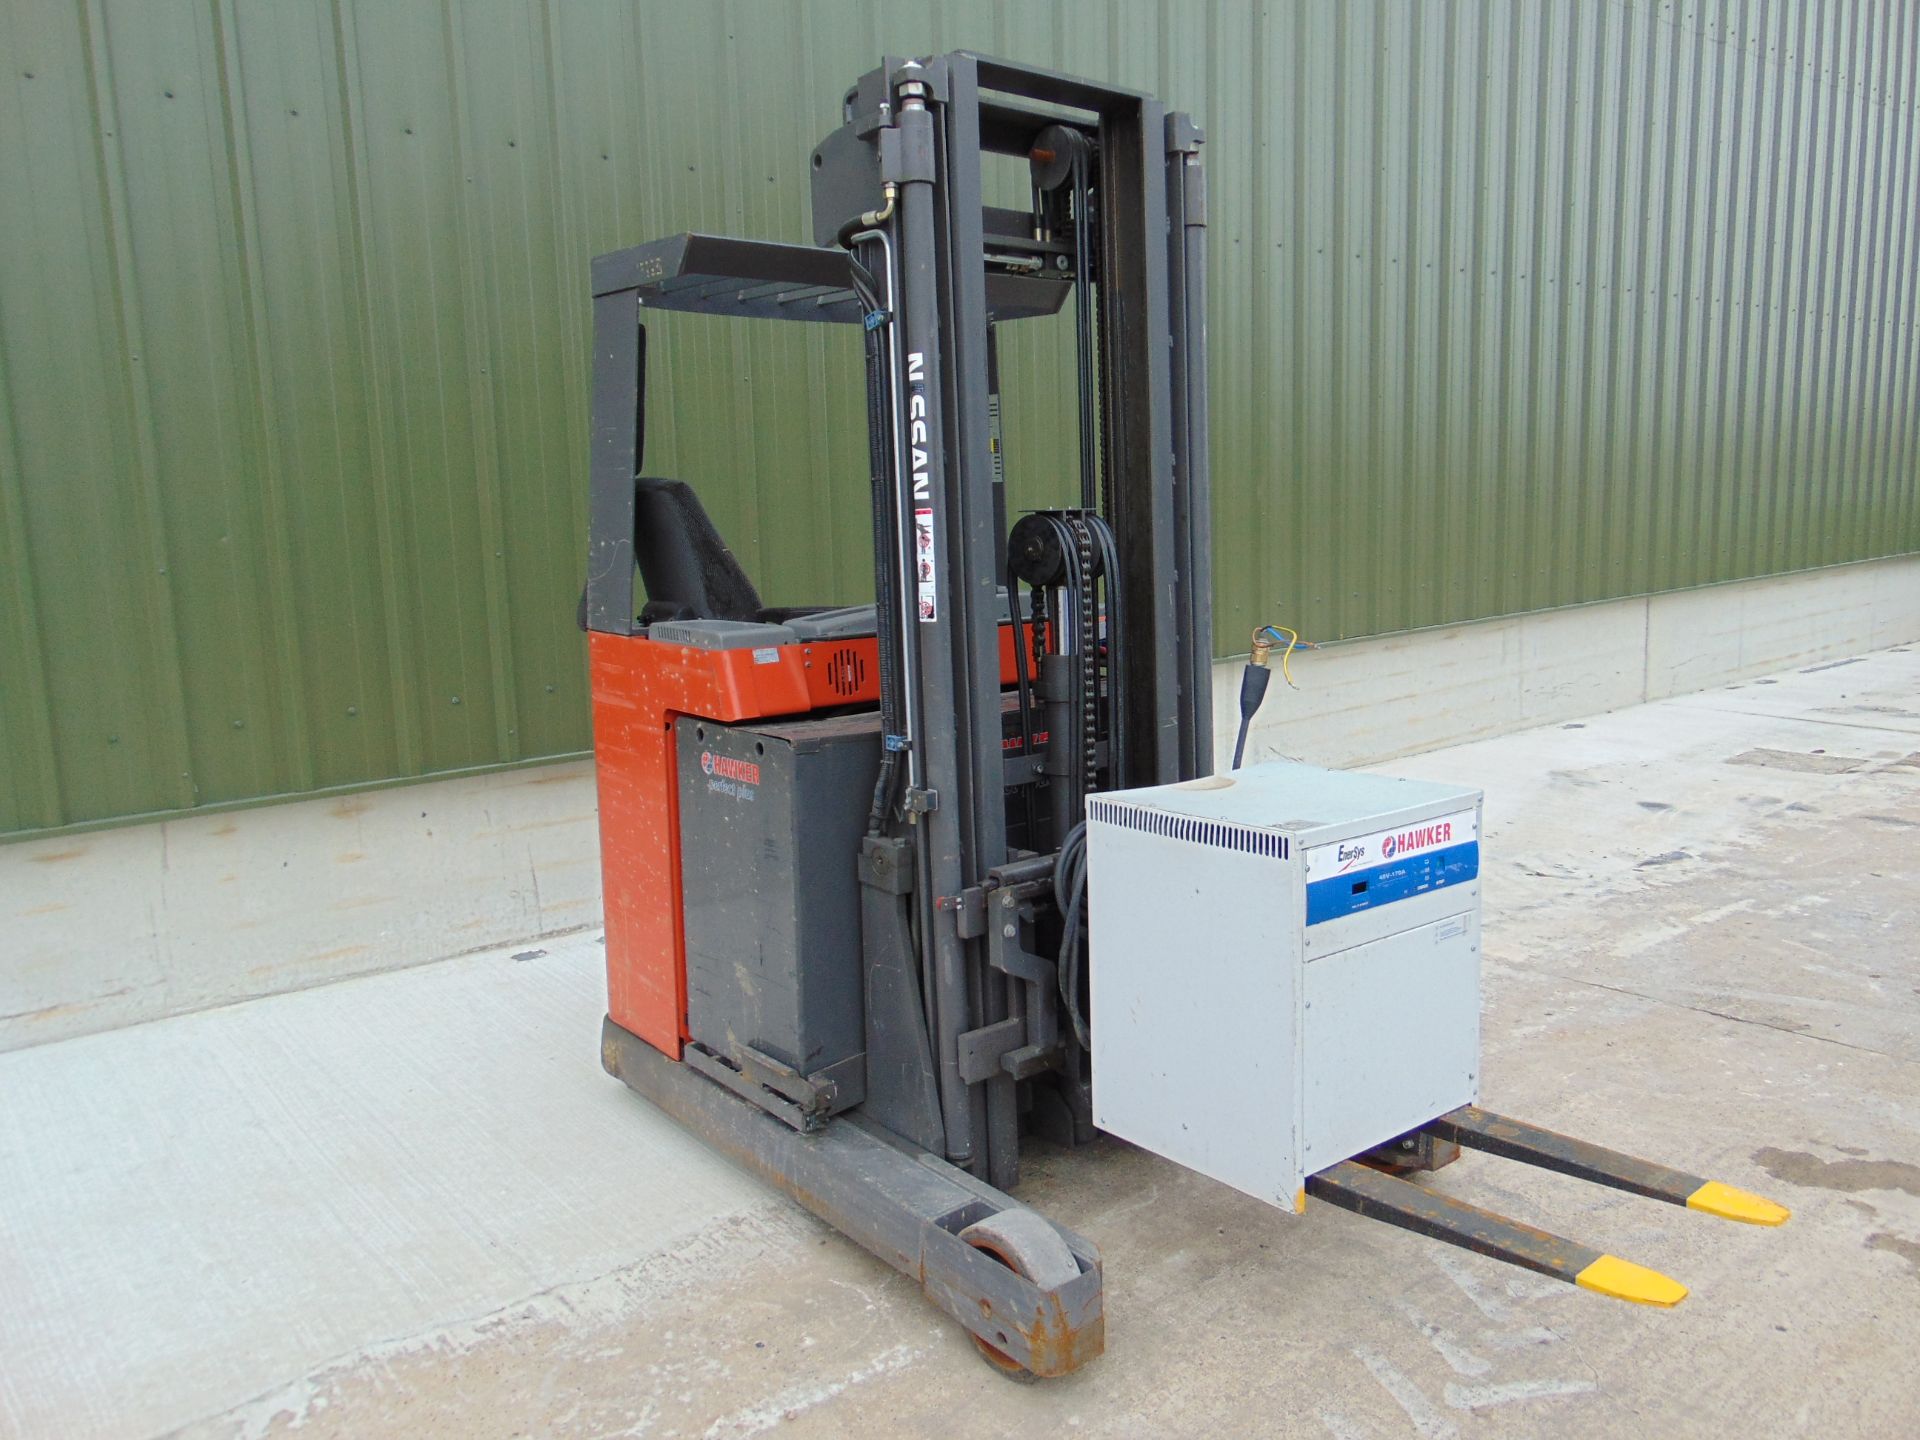 Nissan UNS-200 Electric Reach Fork Lift w/ Battery Charger Unit 2283 hrs - Image 18 of 31